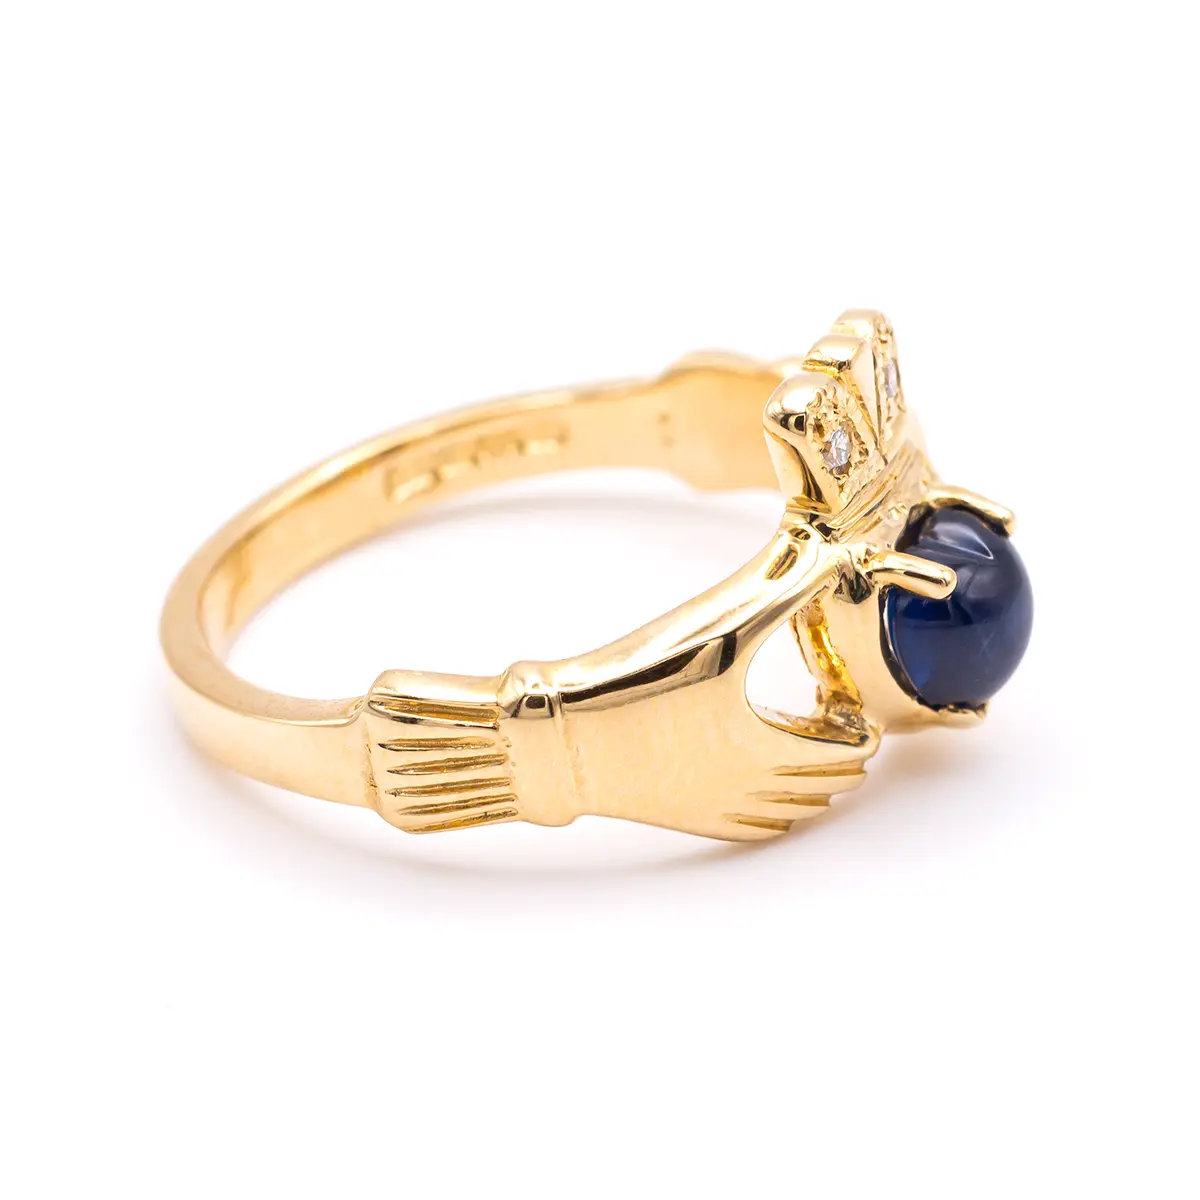 Gold Claddagh Ring with Heartshaped Sapphire and Diamonds